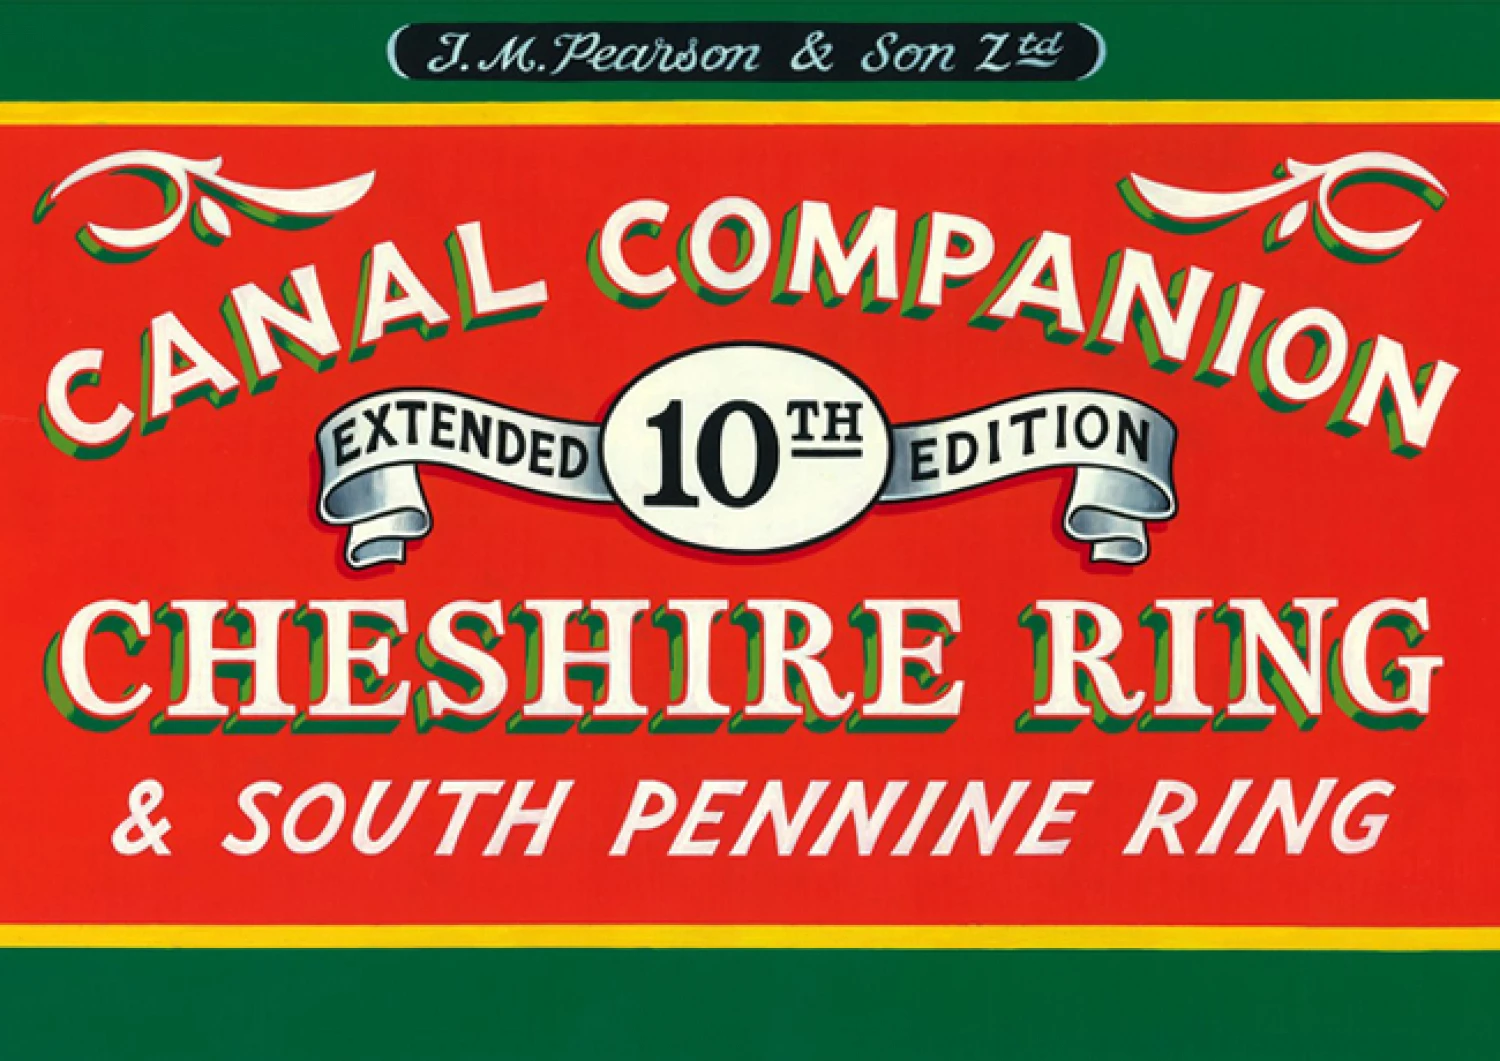 pearsons cheshire ring